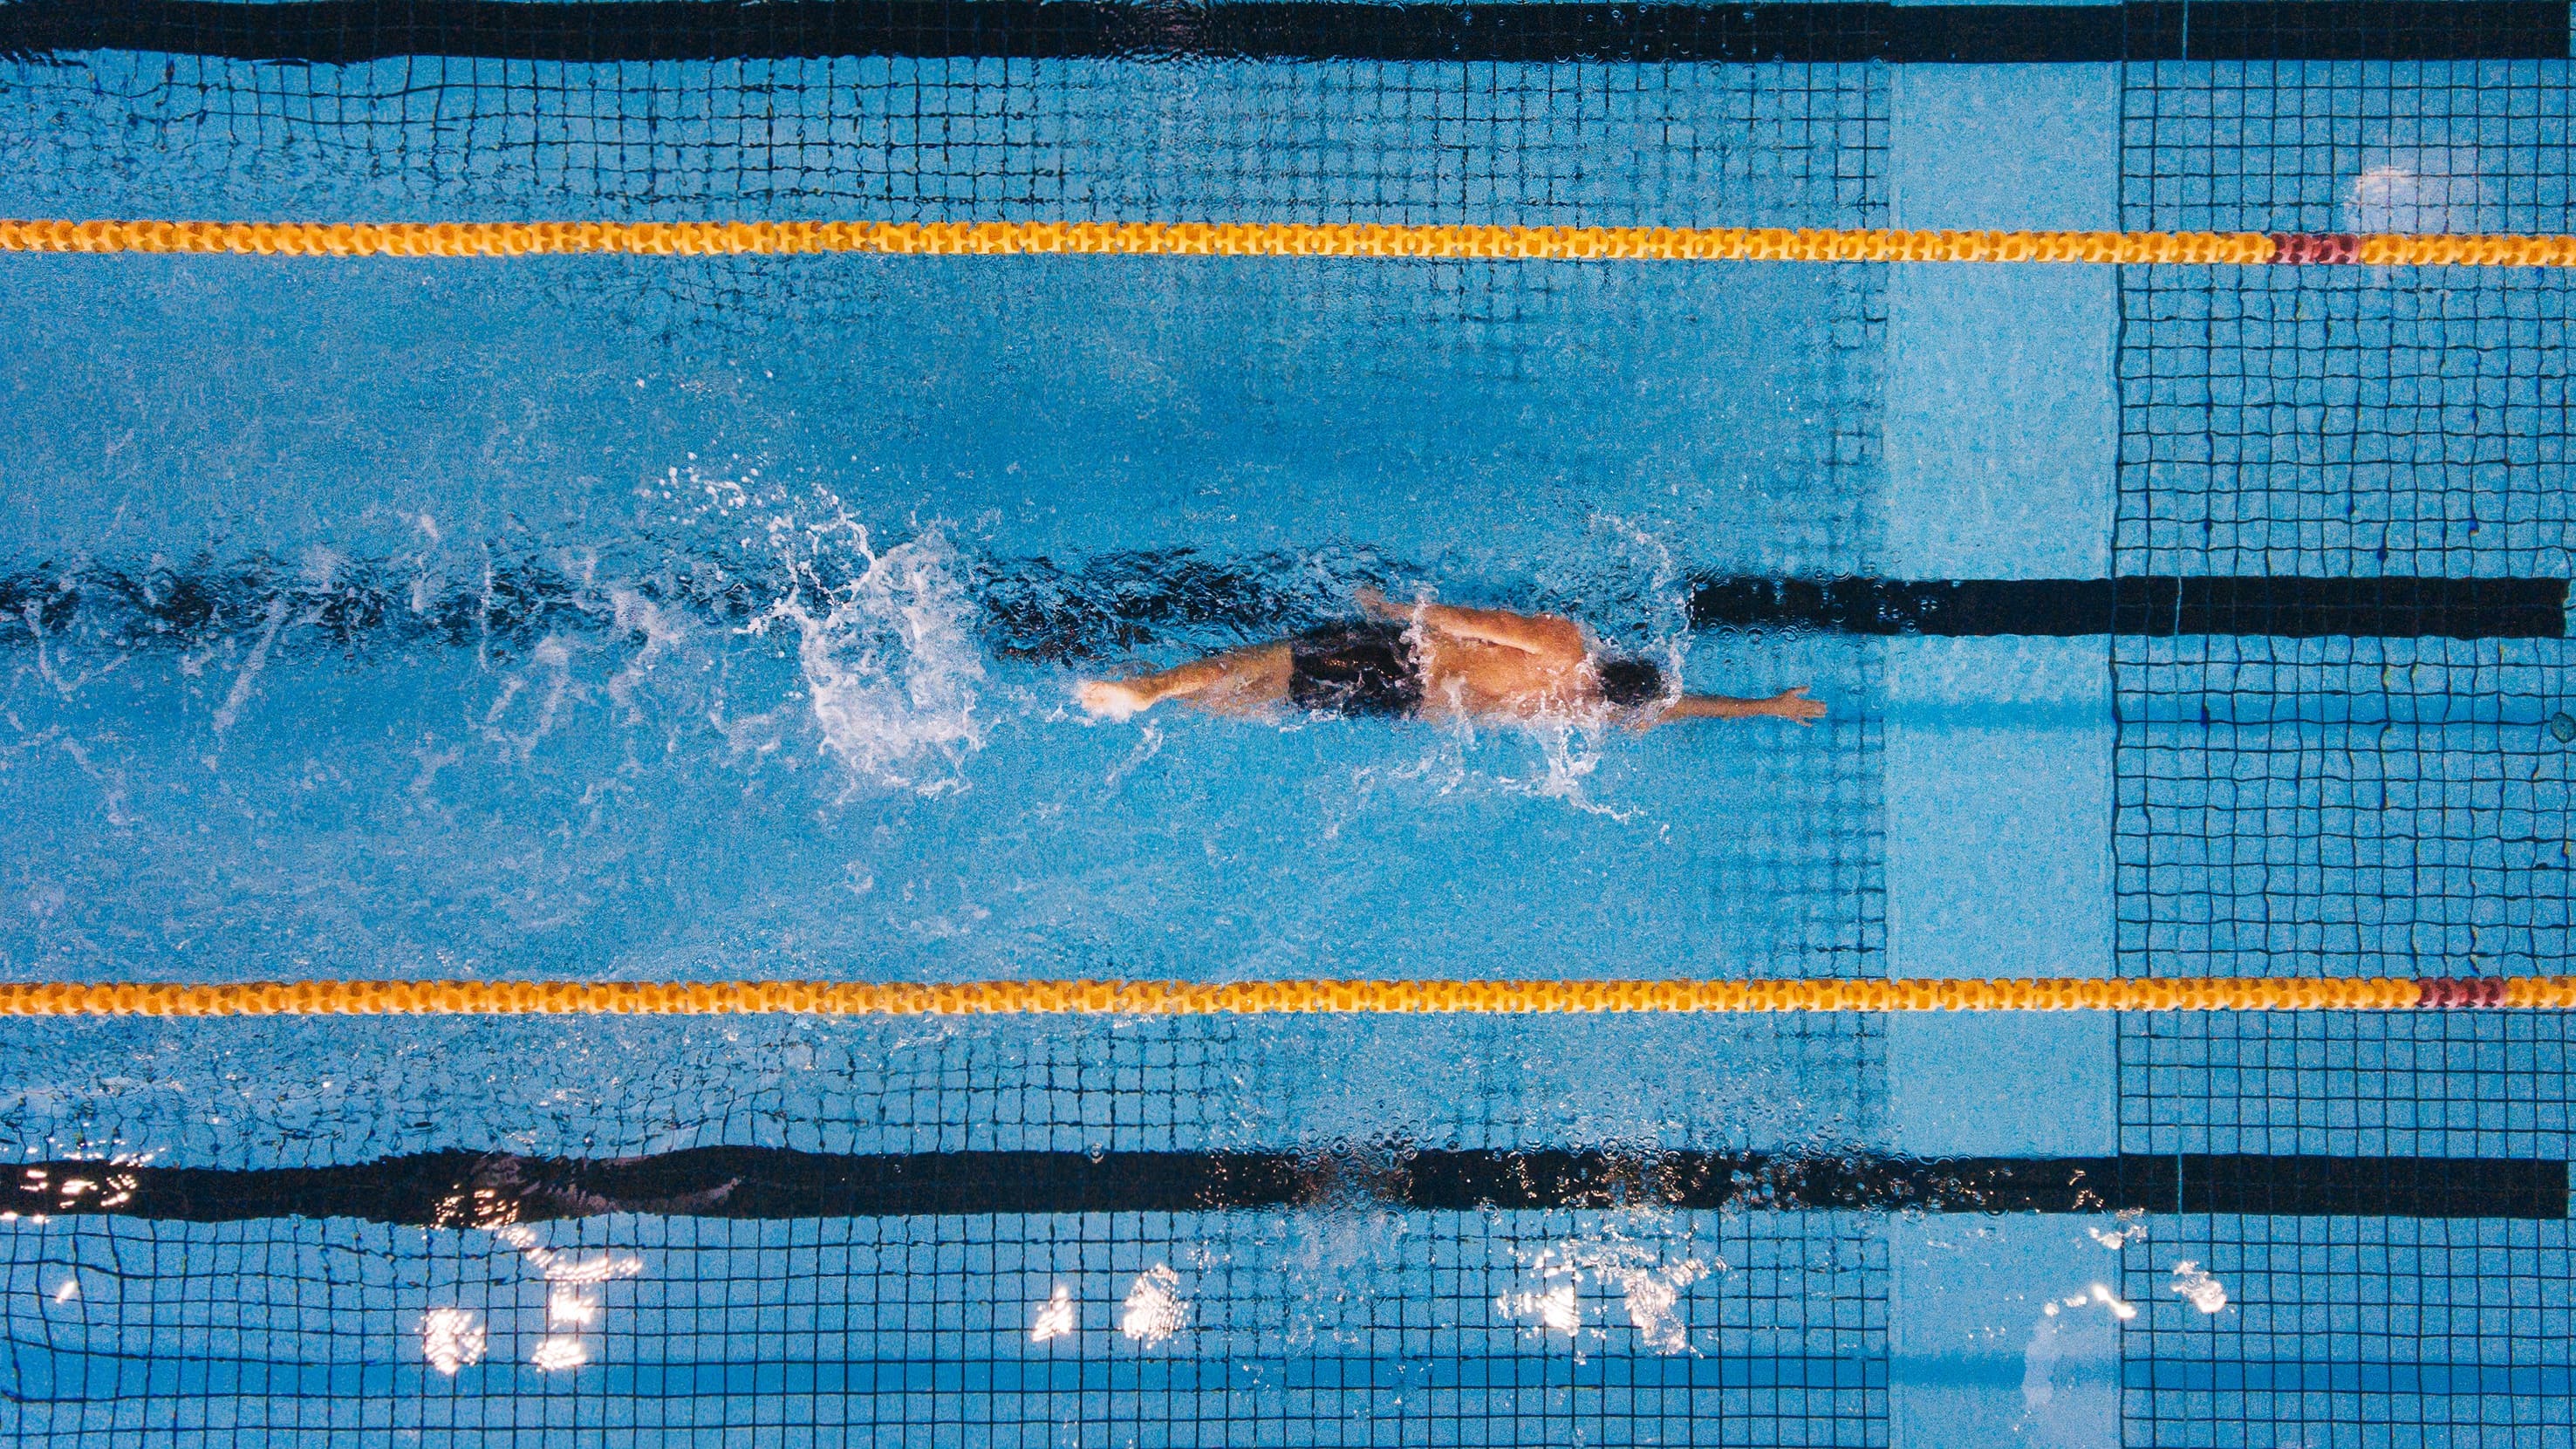 person swimming laps in a pool, showing good lung health